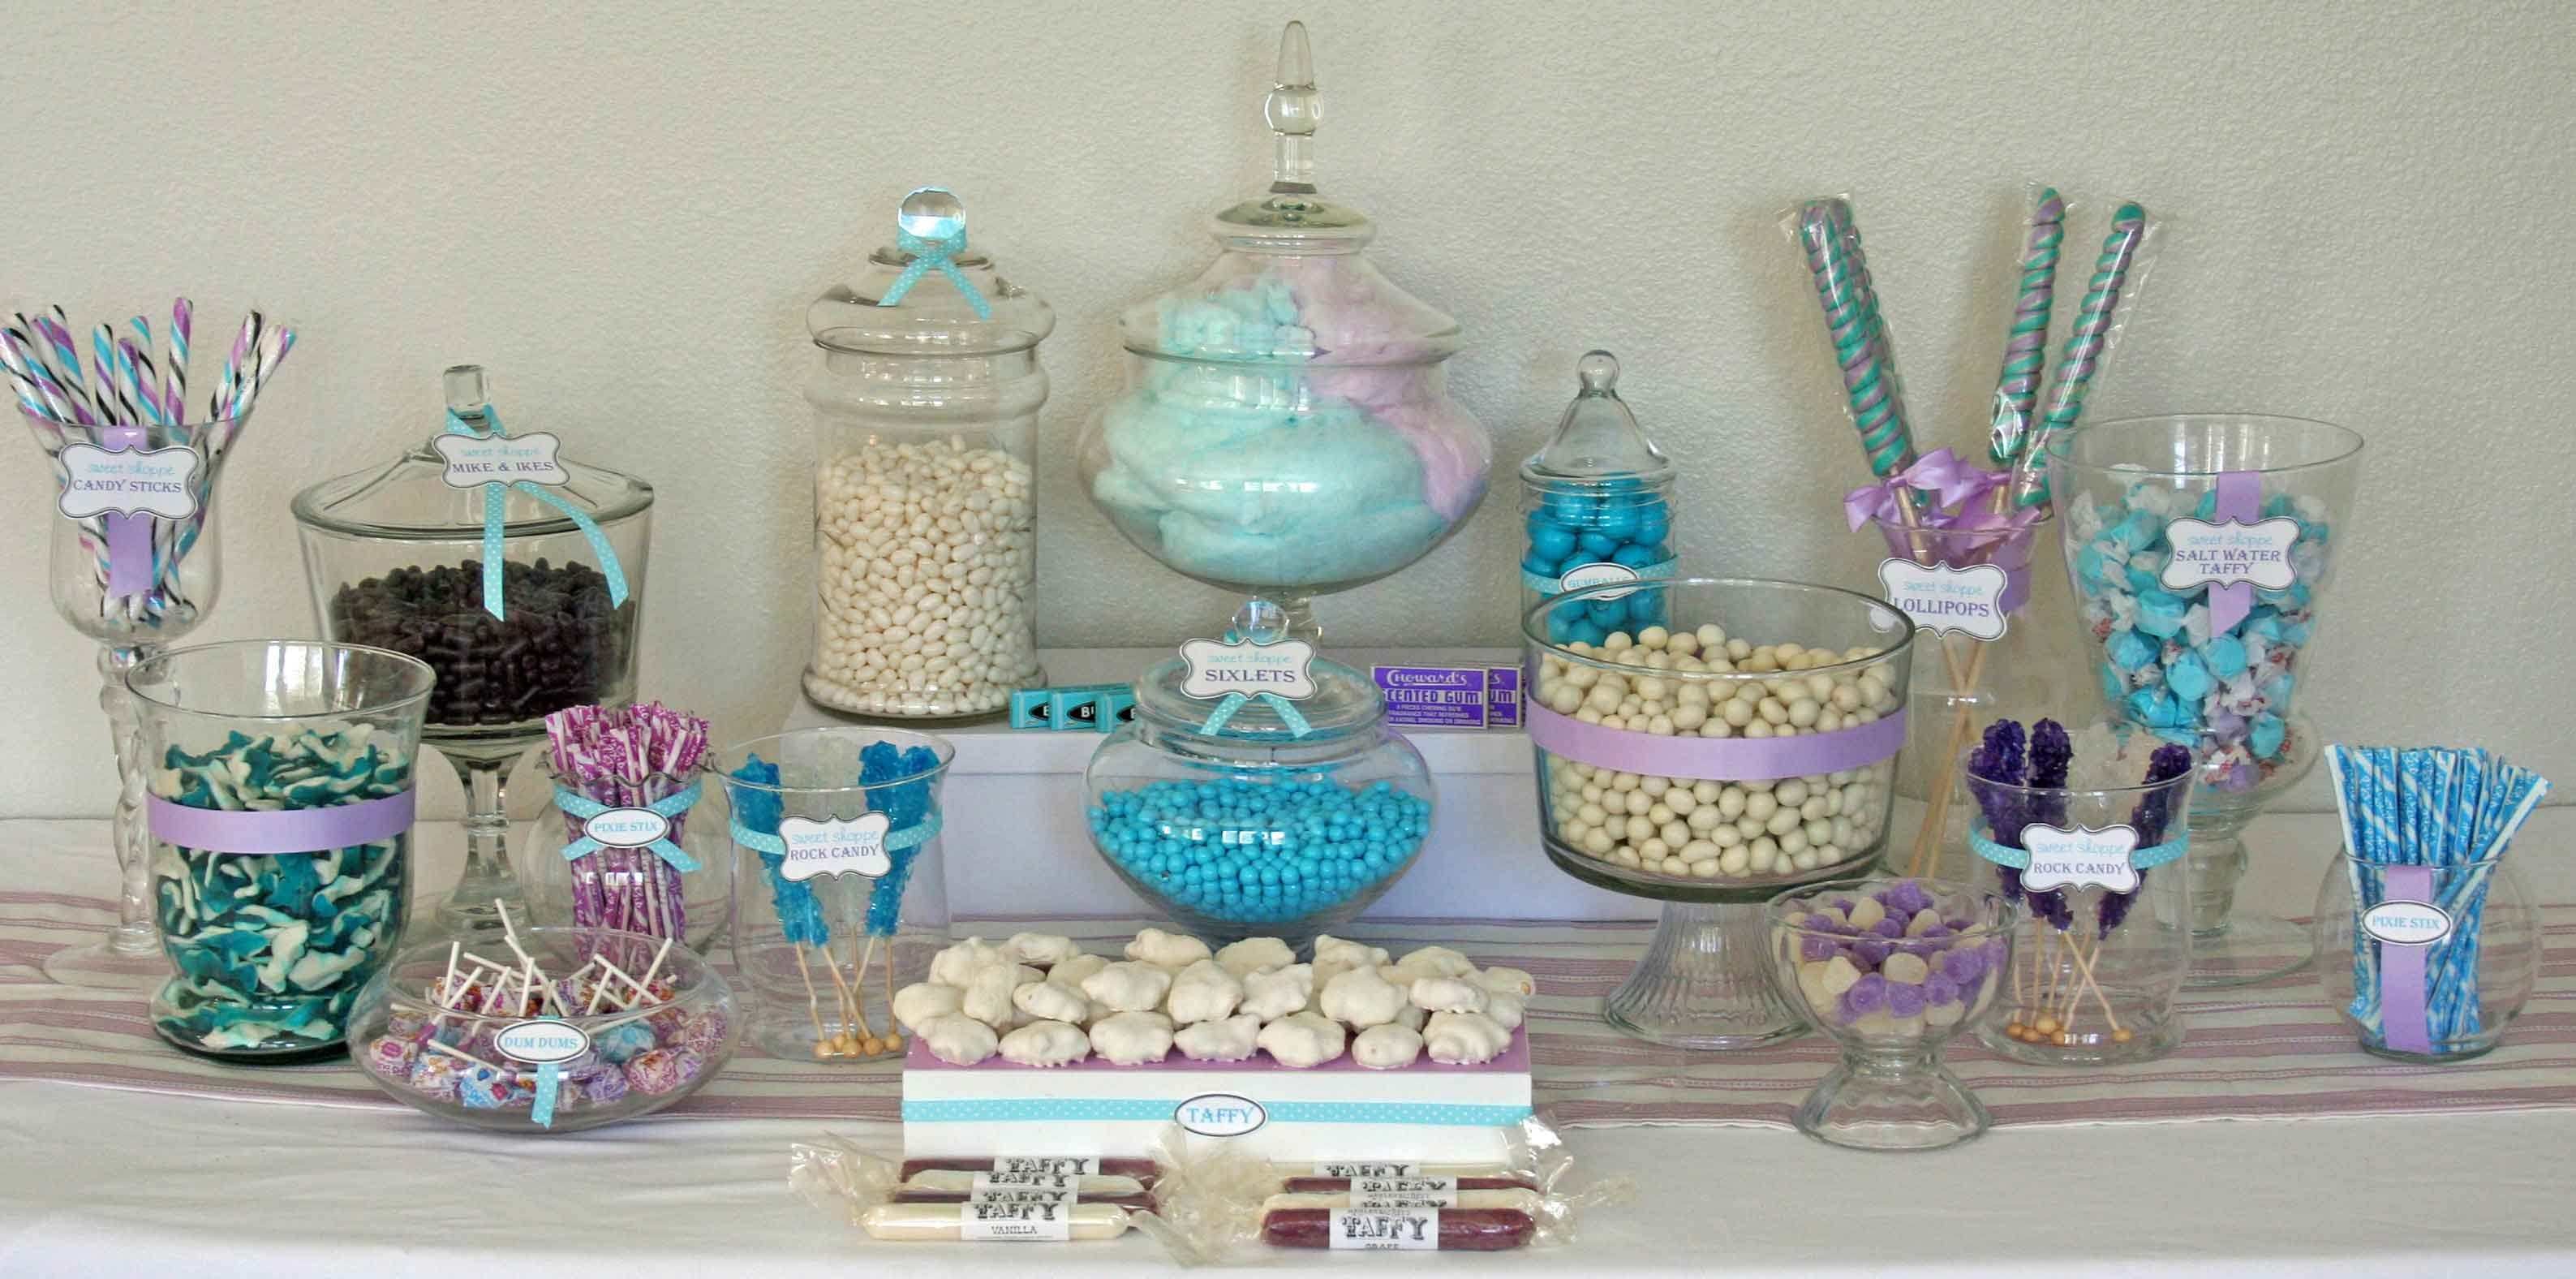 How To Create The Perfect DIY Candy Buffet My Love Of Style Pinterest Bar